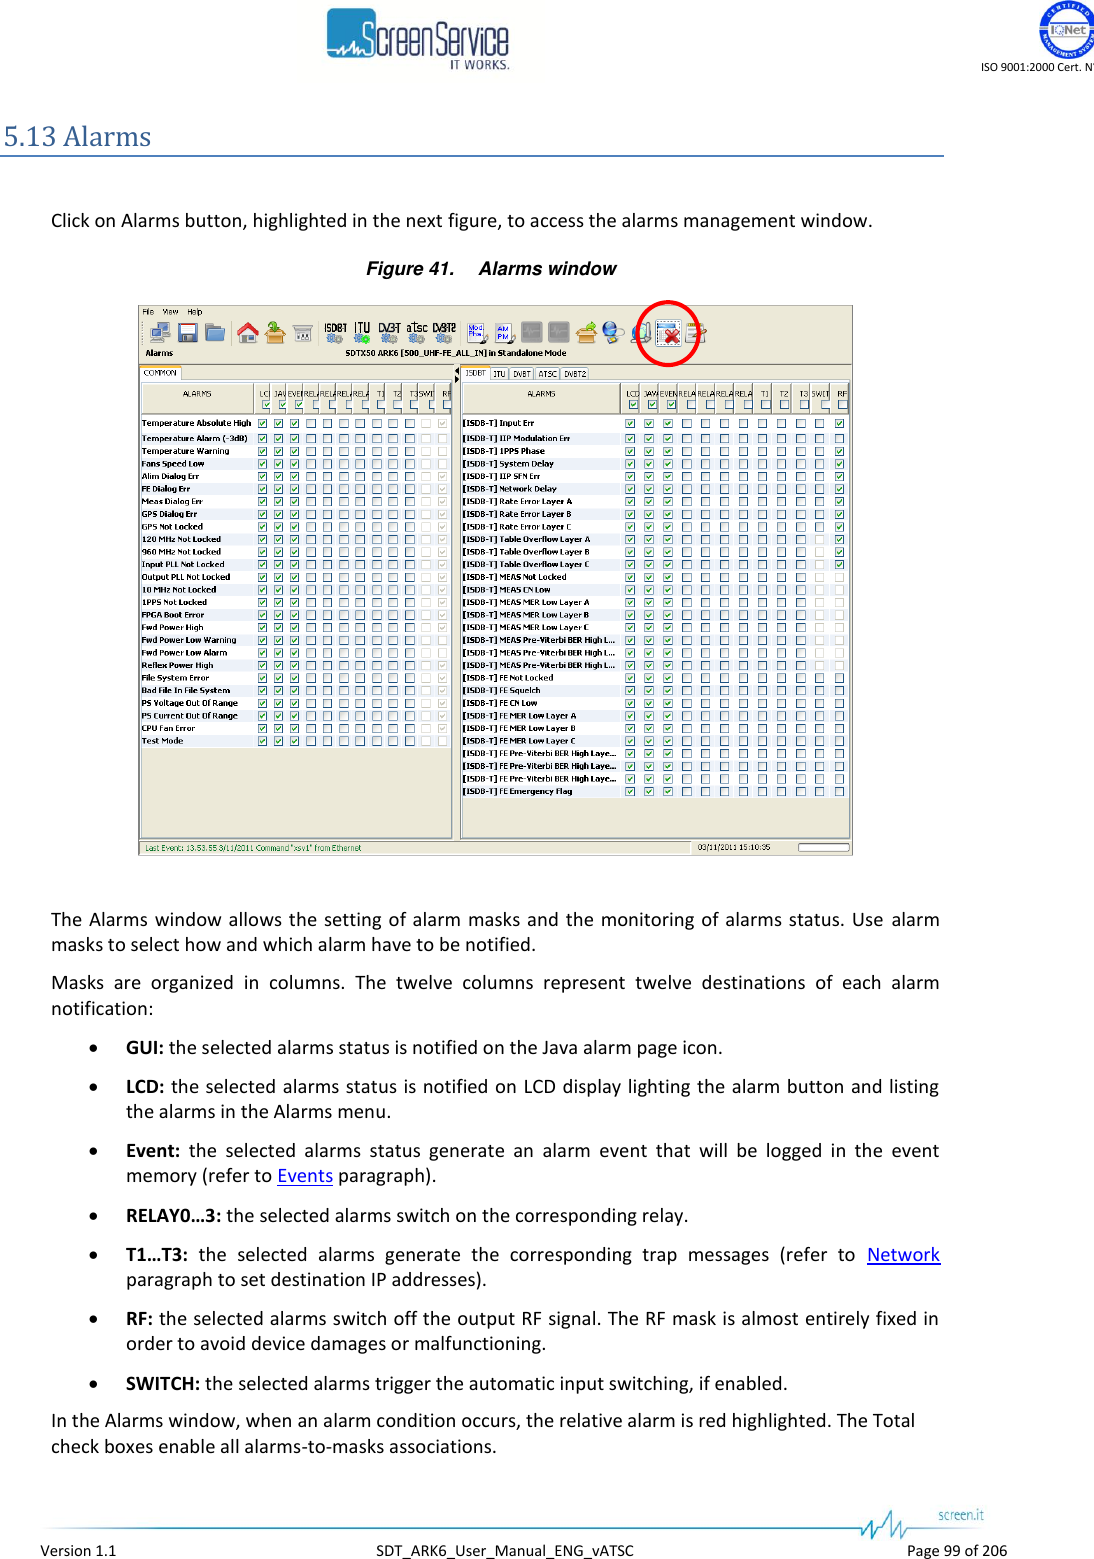    ISO 9001:2000 Cert. N°4500/1   Version 1.1  SDT_ARK6_User_Manual_ENG_vATSC  Page 99 of 206 5.13 Alarms  Click on Alarms button, highlighted in the next figure, to access the alarms management window. Figure 41. Alarms window   The Alarms window allows the setting of alarm  masks and the monitoring of alarms status. Use alarm masks to select how and which alarm have to be notified. Masks  are  organized  in  columns.  The  twelve  columns  represent  twelve  destinations  of  each  alarm notification:  GUI: the selected alarms status is notified on the Java alarm page icon.  LCD: the selected alarms status is notified on LCD display lighting the alarm button and listing the alarms in the Alarms menu.  Event:  the  selected  alarms  status  generate  an  alarm  event  that  will  be  logged  in  the  event memory (refer to Events paragraph).  RELAY0…3: the selected alarms switch on the corresponding relay.  T1…T3:  the  selected  alarms  generate  the  corresponding  trap  messages  (refer  to  Network paragraph to set destination IP addresses).  RF: the selected alarms switch off the output RF signal. The RF mask is almost entirely fixed in order to avoid device damages or malfunctioning.  SWITCH: the selected alarms trigger the automatic input switching, if enabled. In the Alarms window, when an alarm condition occurs, the relative alarm is red highlighted. The Total check boxes enable all alarms-to-masks associations. 